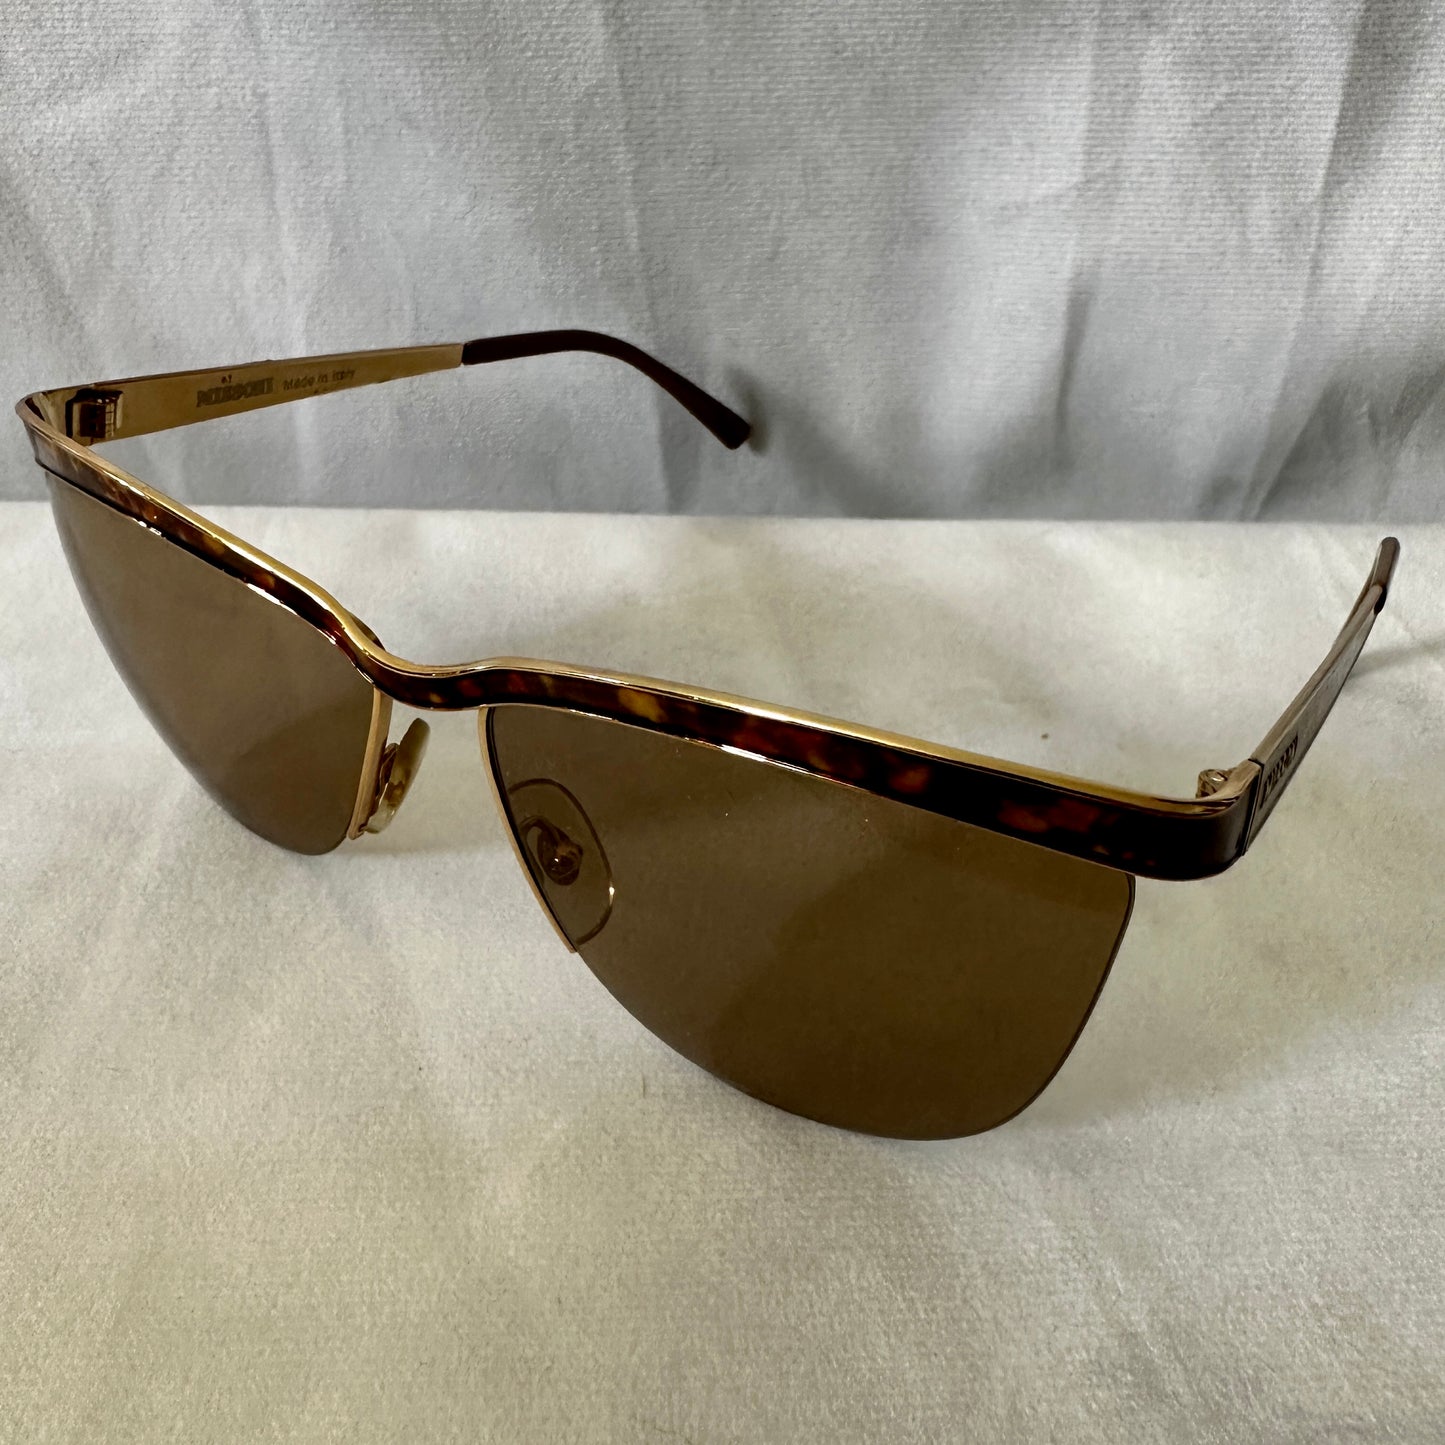 Missoni Vintage 90s Womens Sunglasses - Made in Italy